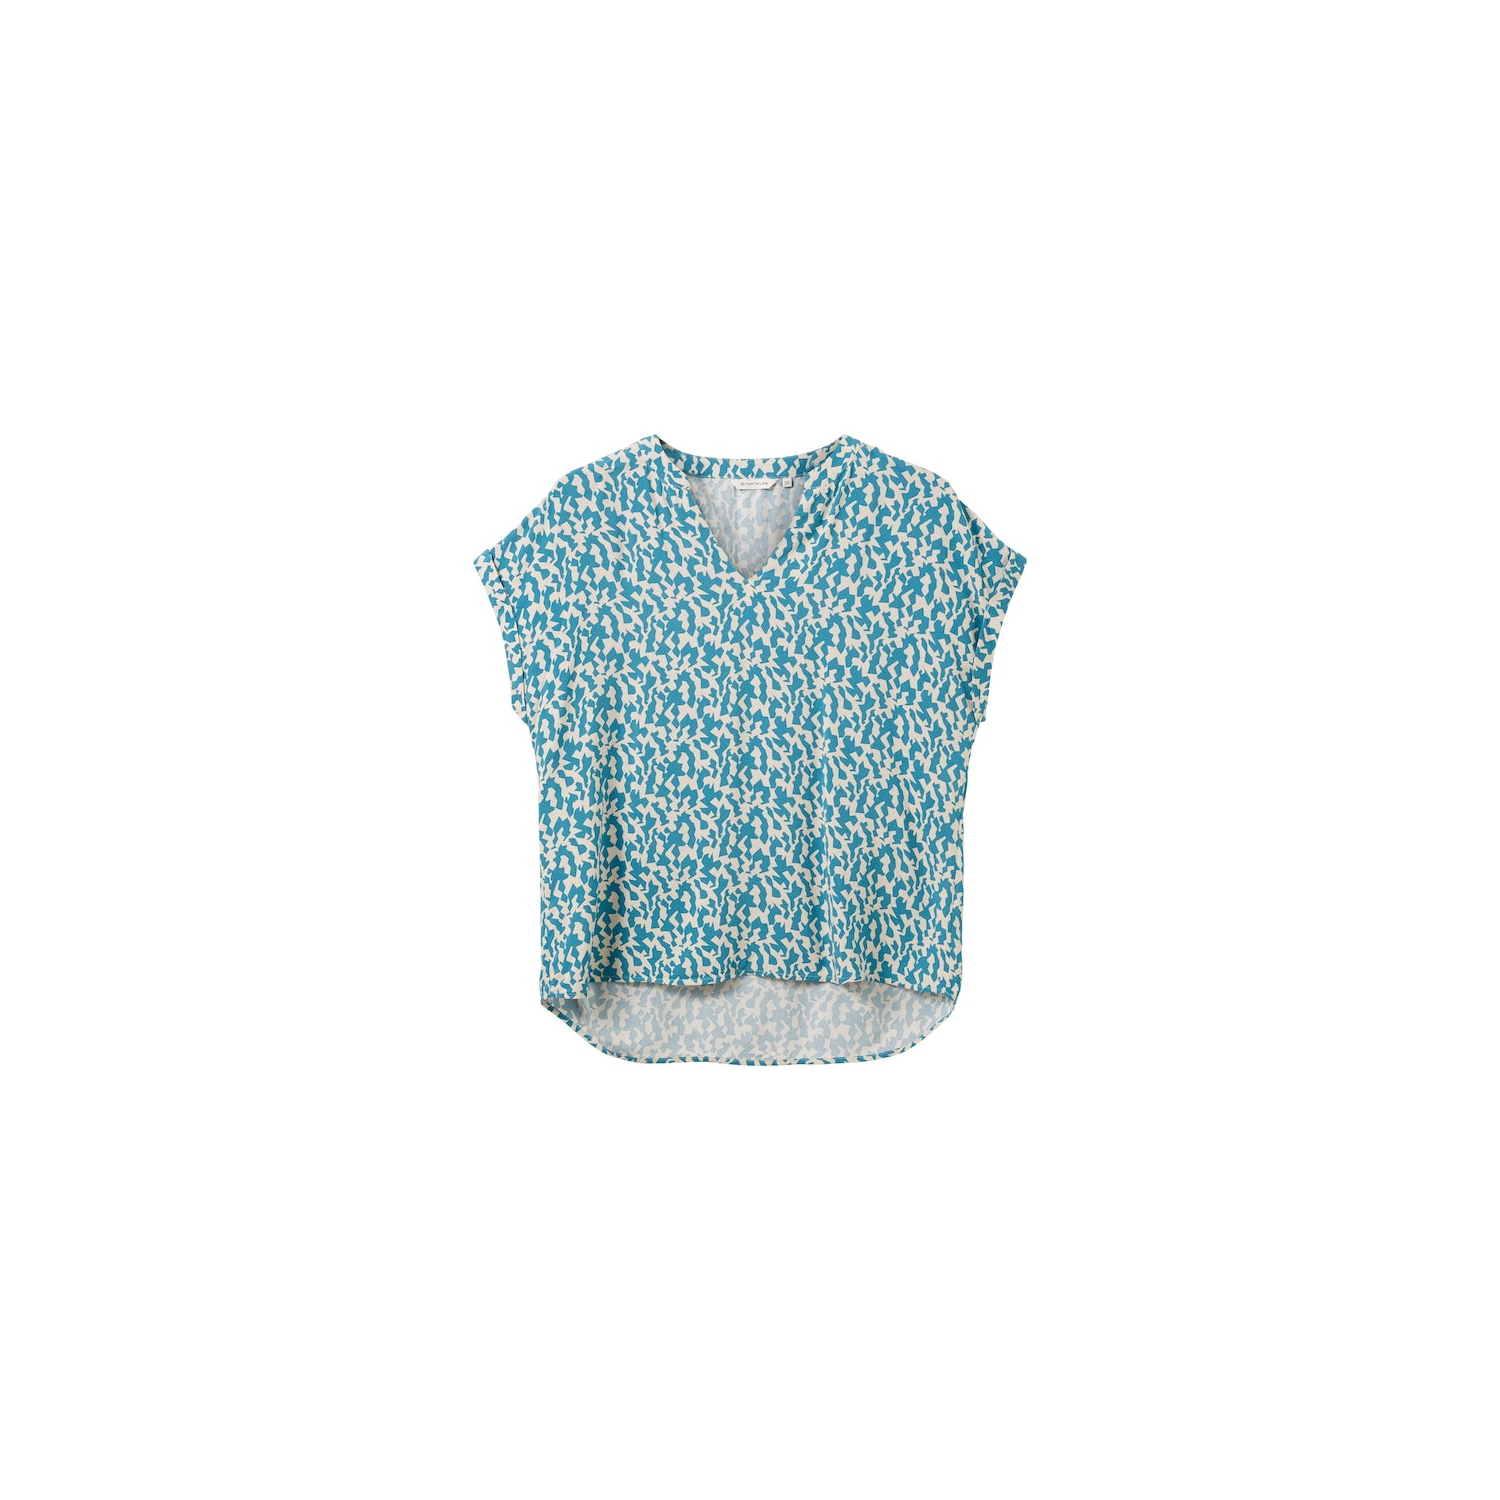 TOM TAILOR Kurzarm-Bluse petrol small abstract design, 25,00 € | 